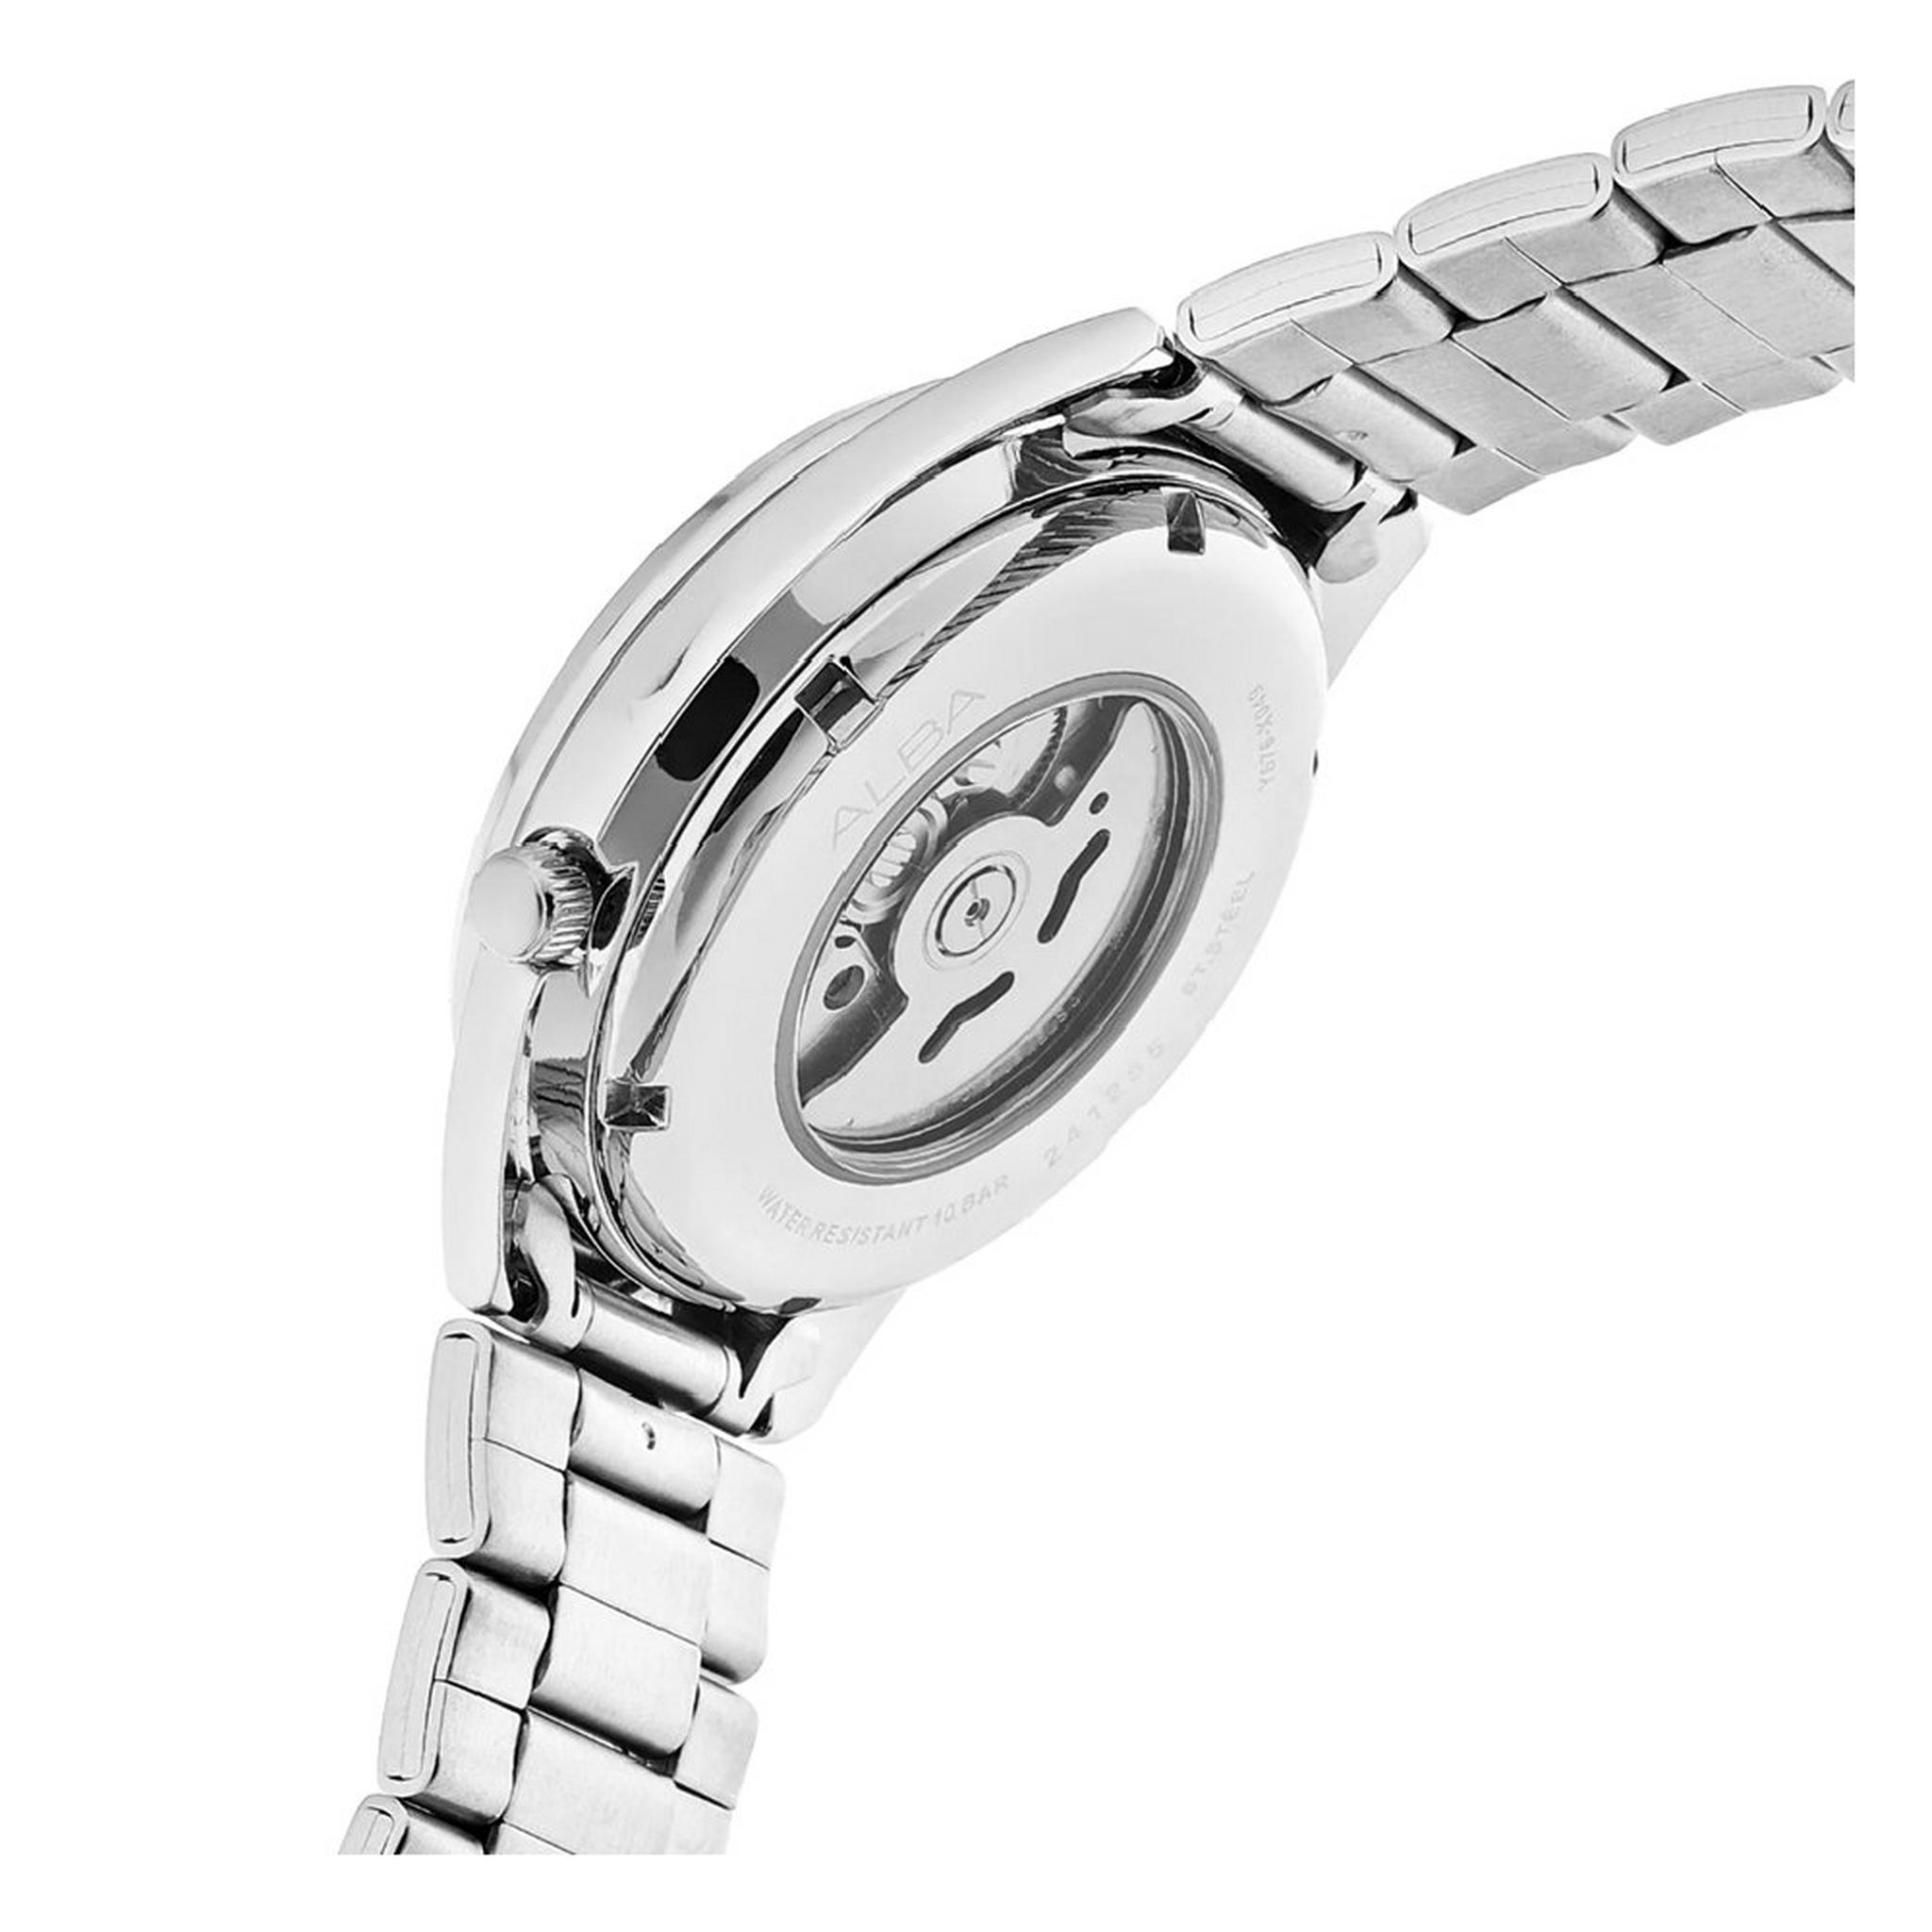 Alba Watch for Men, Analog, Stainless Steel, AL4323X1 - Silver